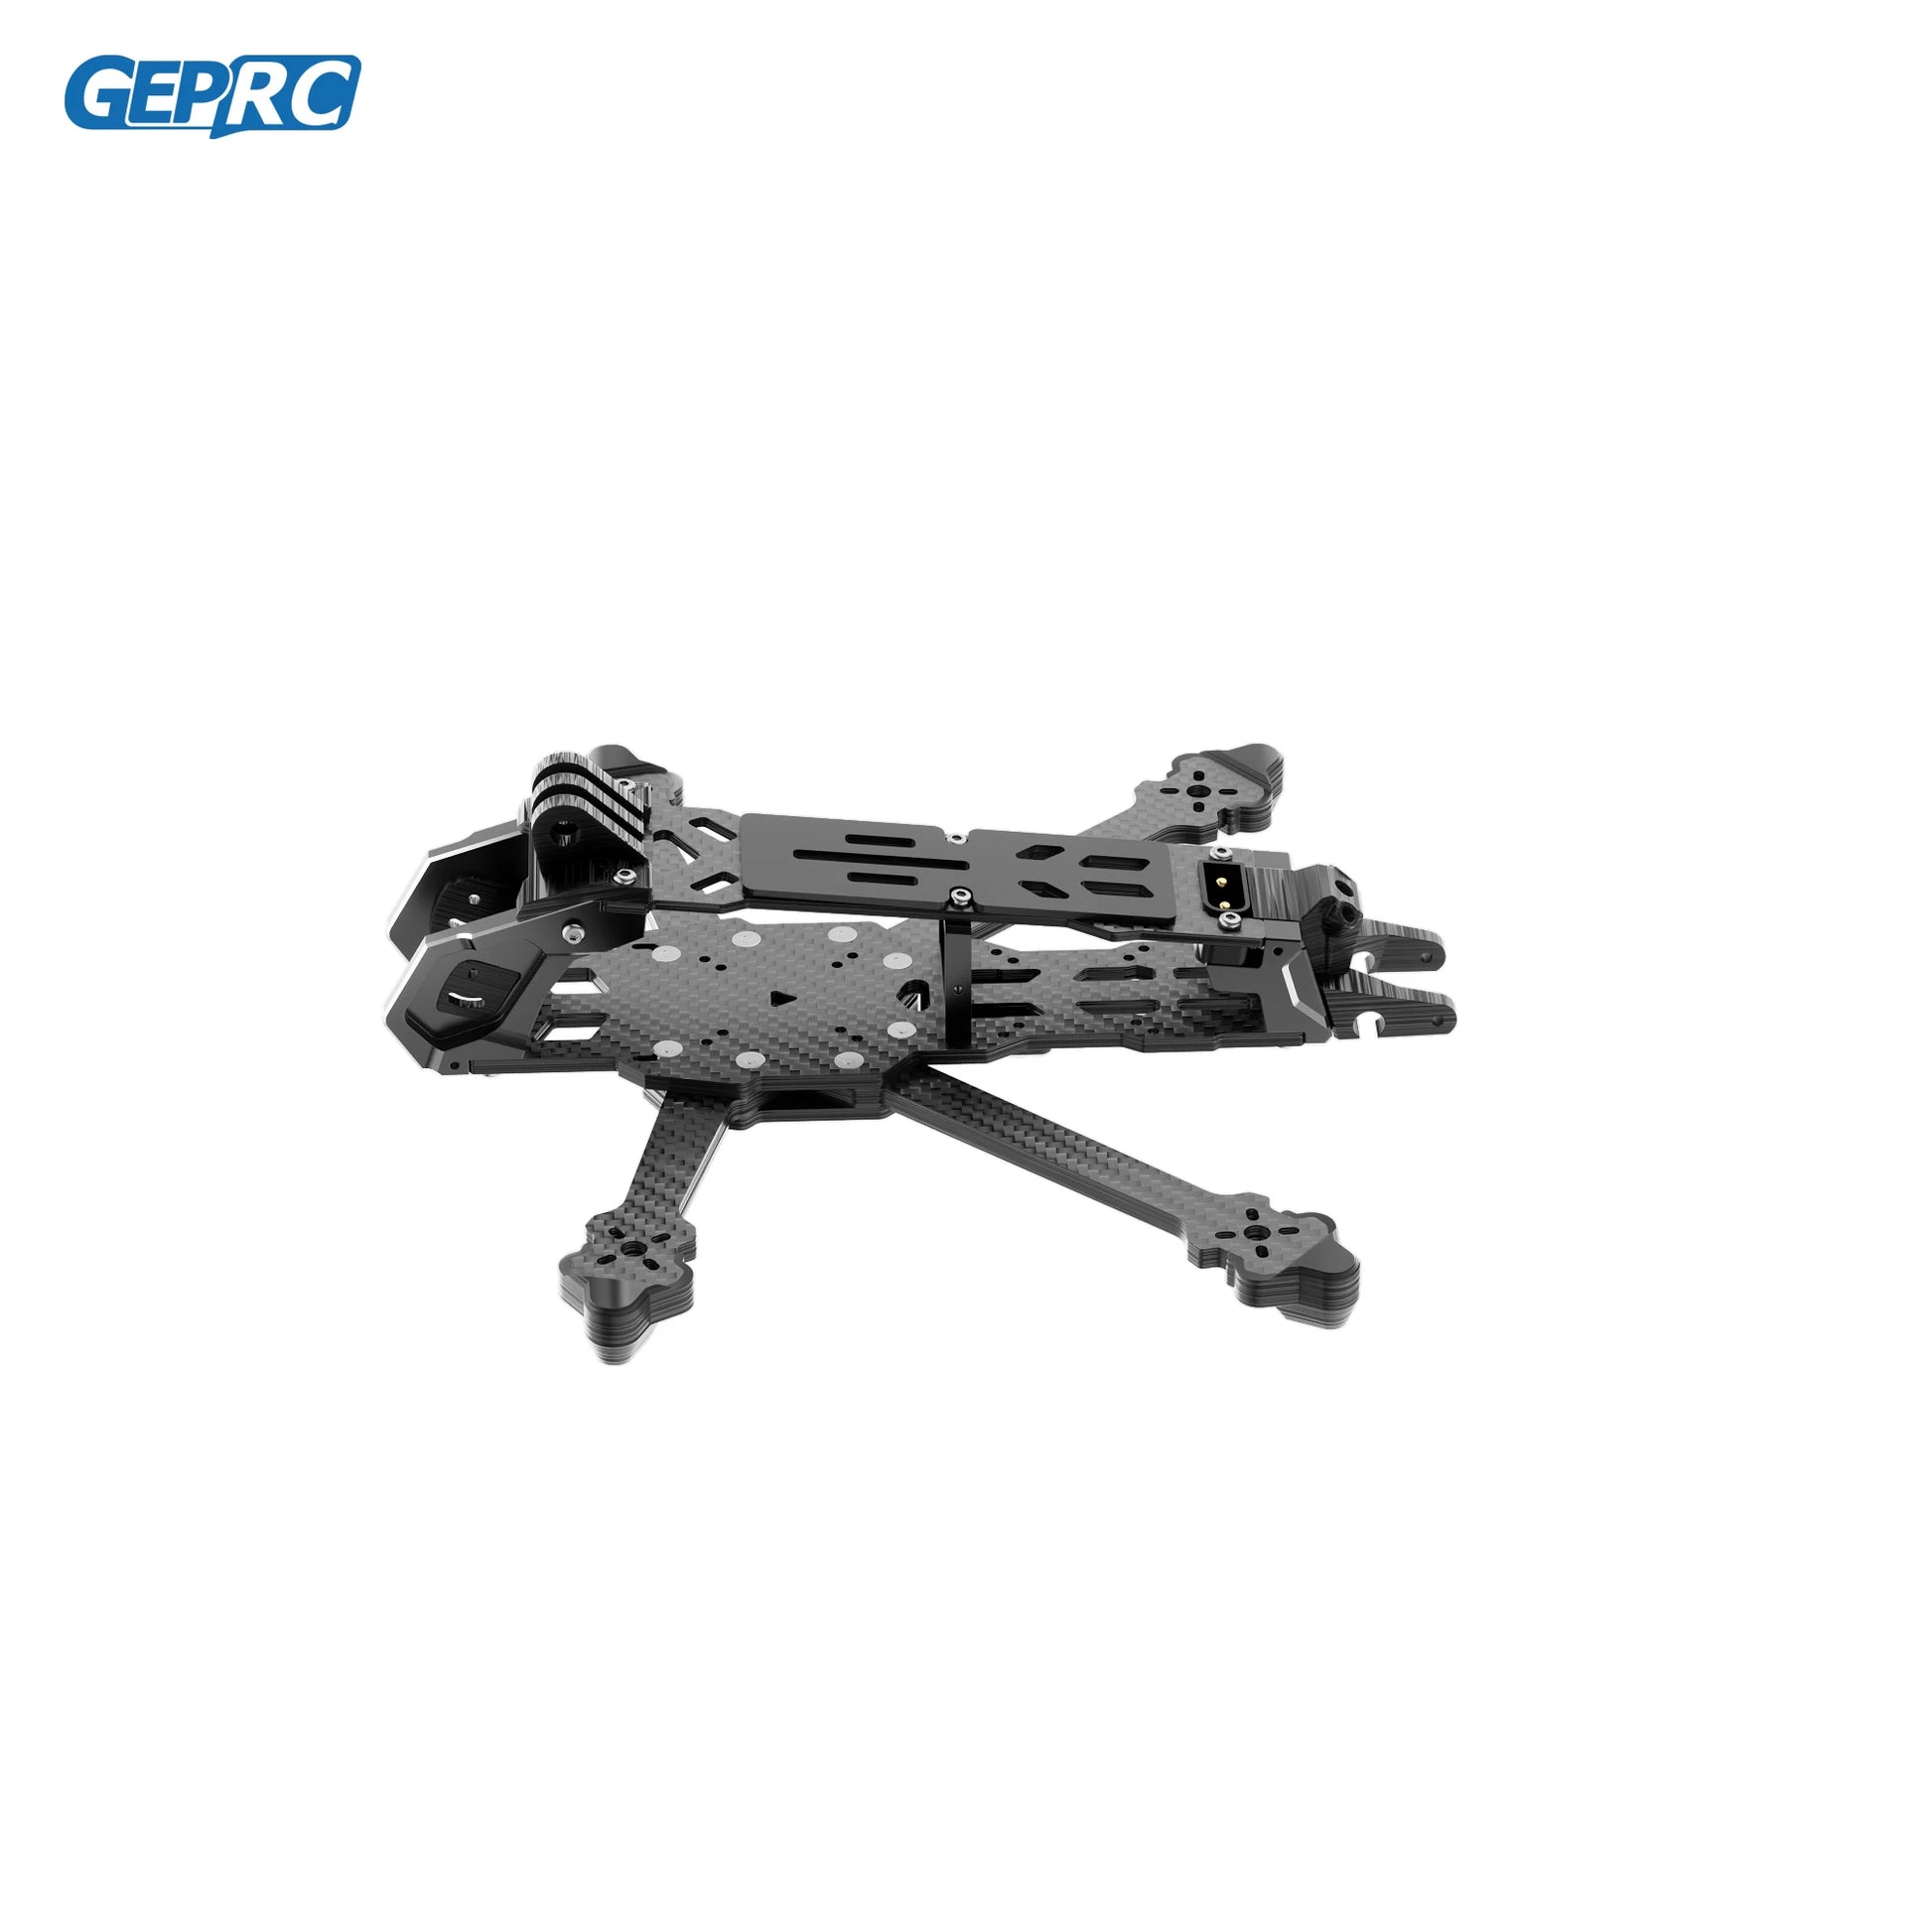 GEPRC GEP-DoMain3.6 / DoMain4.2 Frame Parts - Suitable  Replacement Repair Part for RC DIY FPV Freestyle Drone